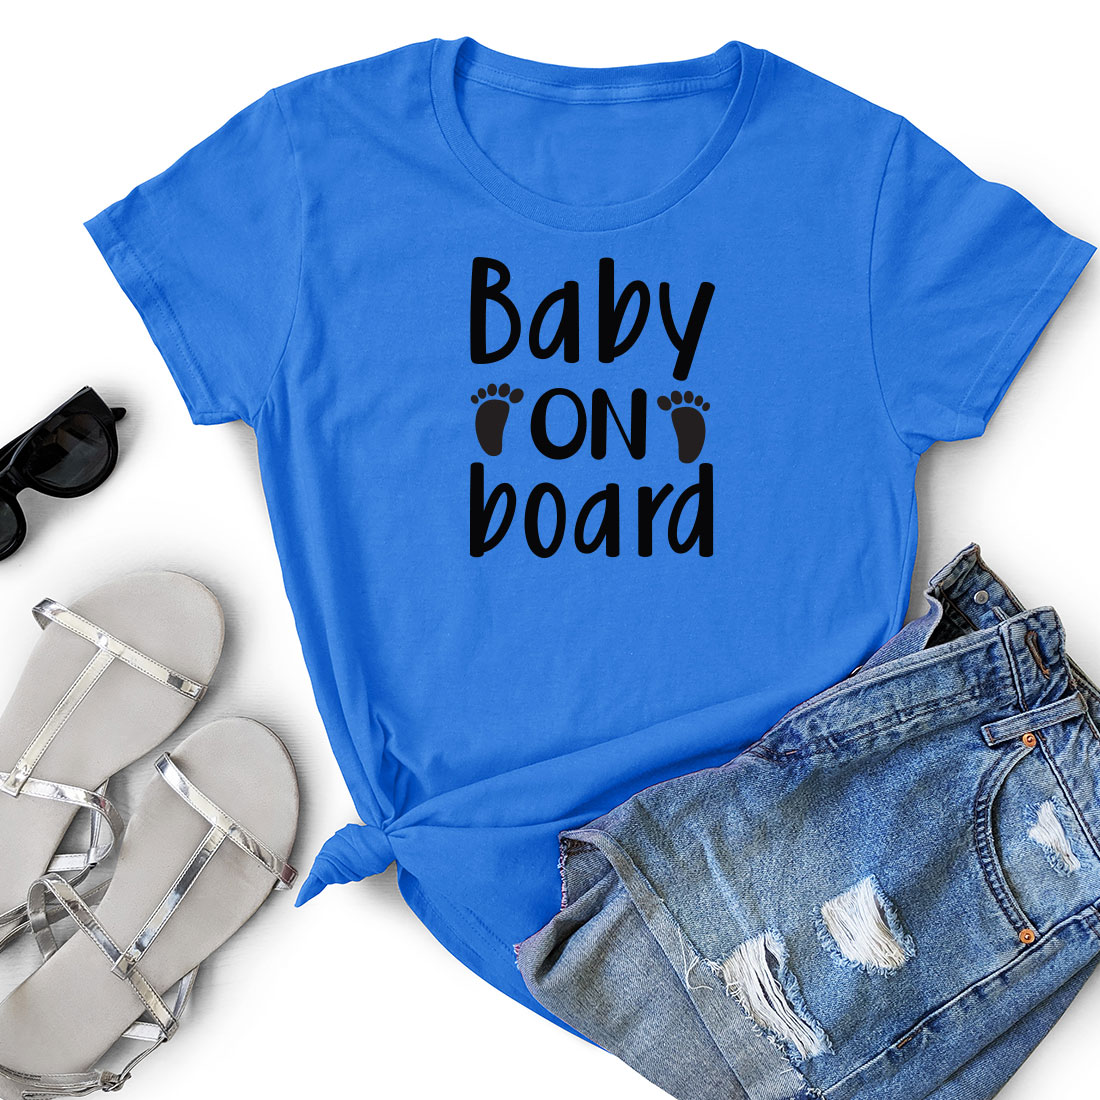 T - shirt that says baby on board next to a pair of shorts.